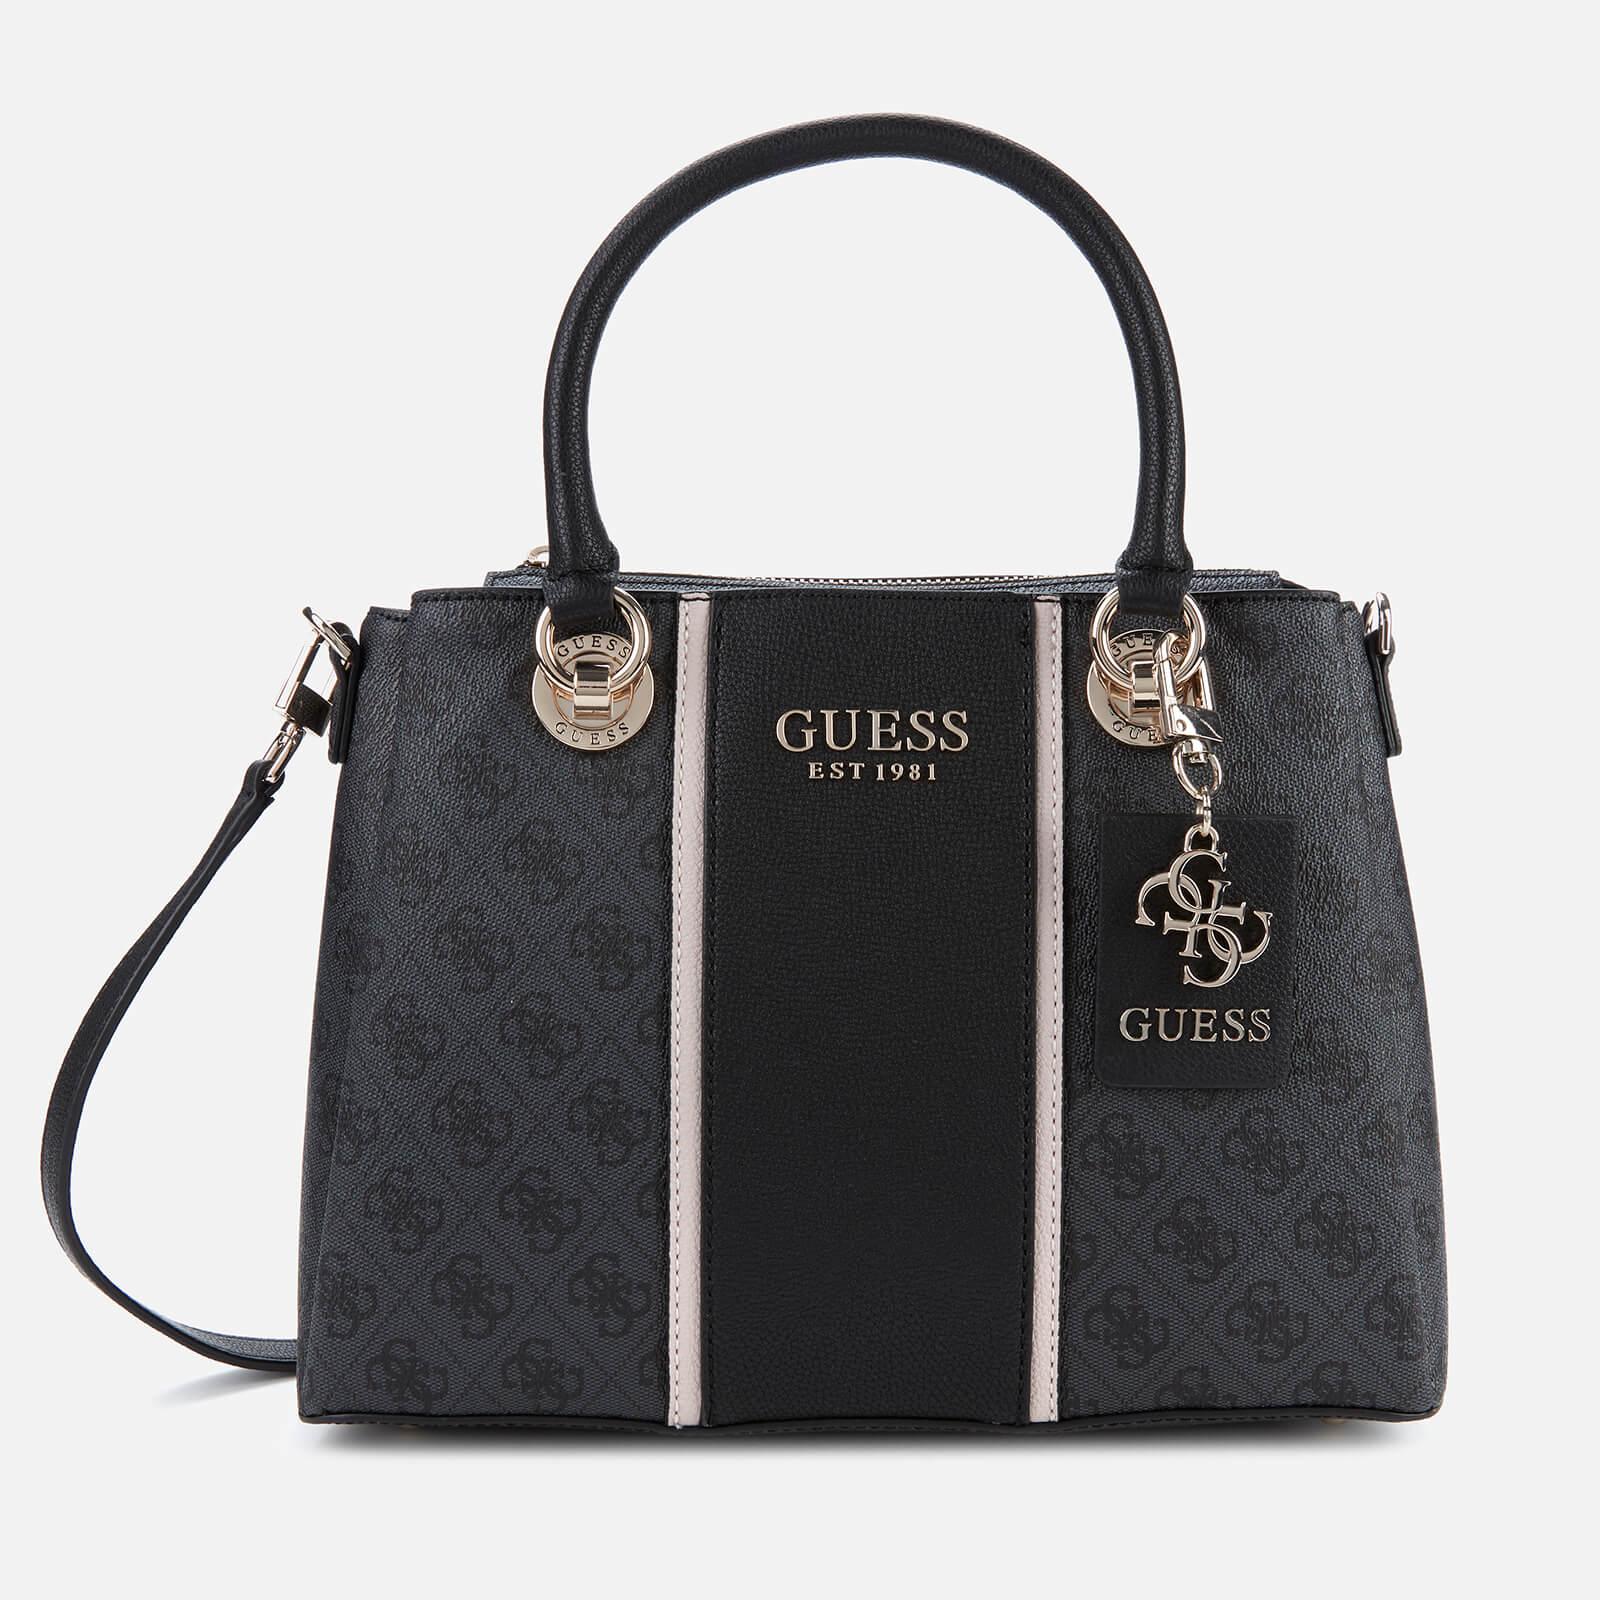 Guess Cathleen 3 Compartment Satchel in Black | Lyst